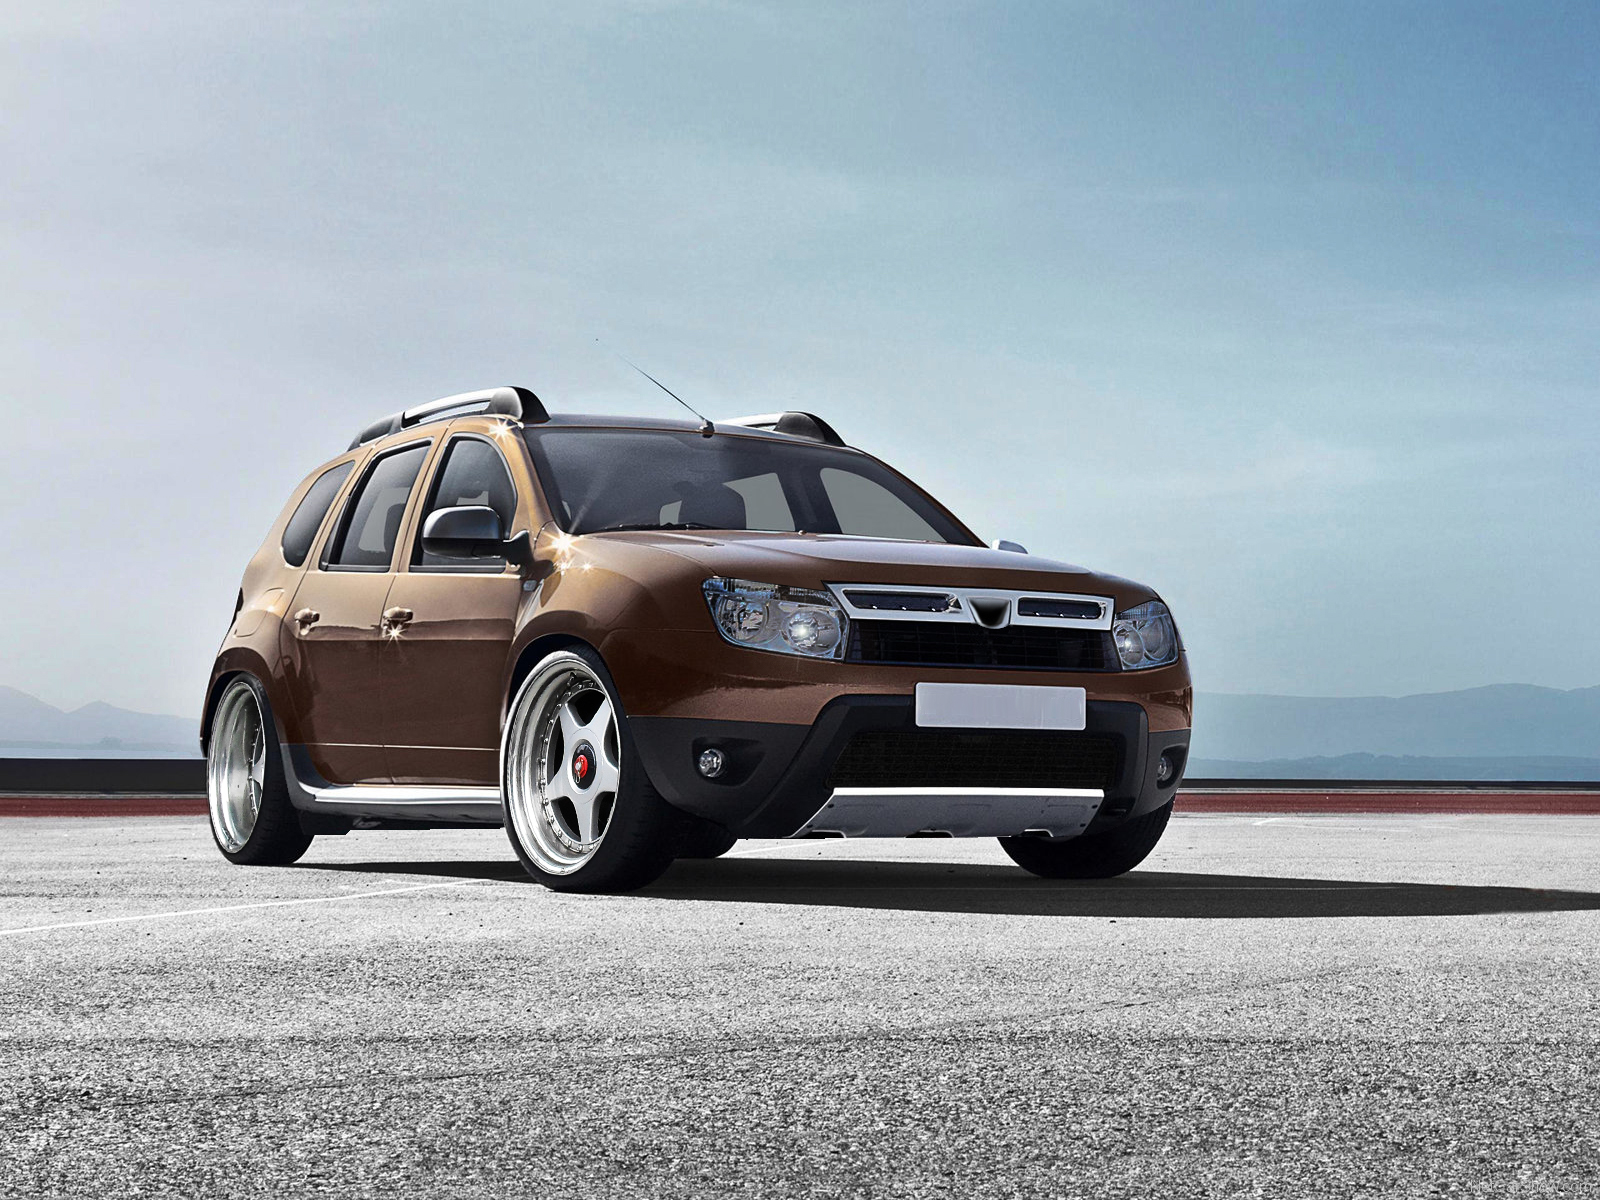 Dacia Duster Tuning 2 by cipriany on DeviantArt